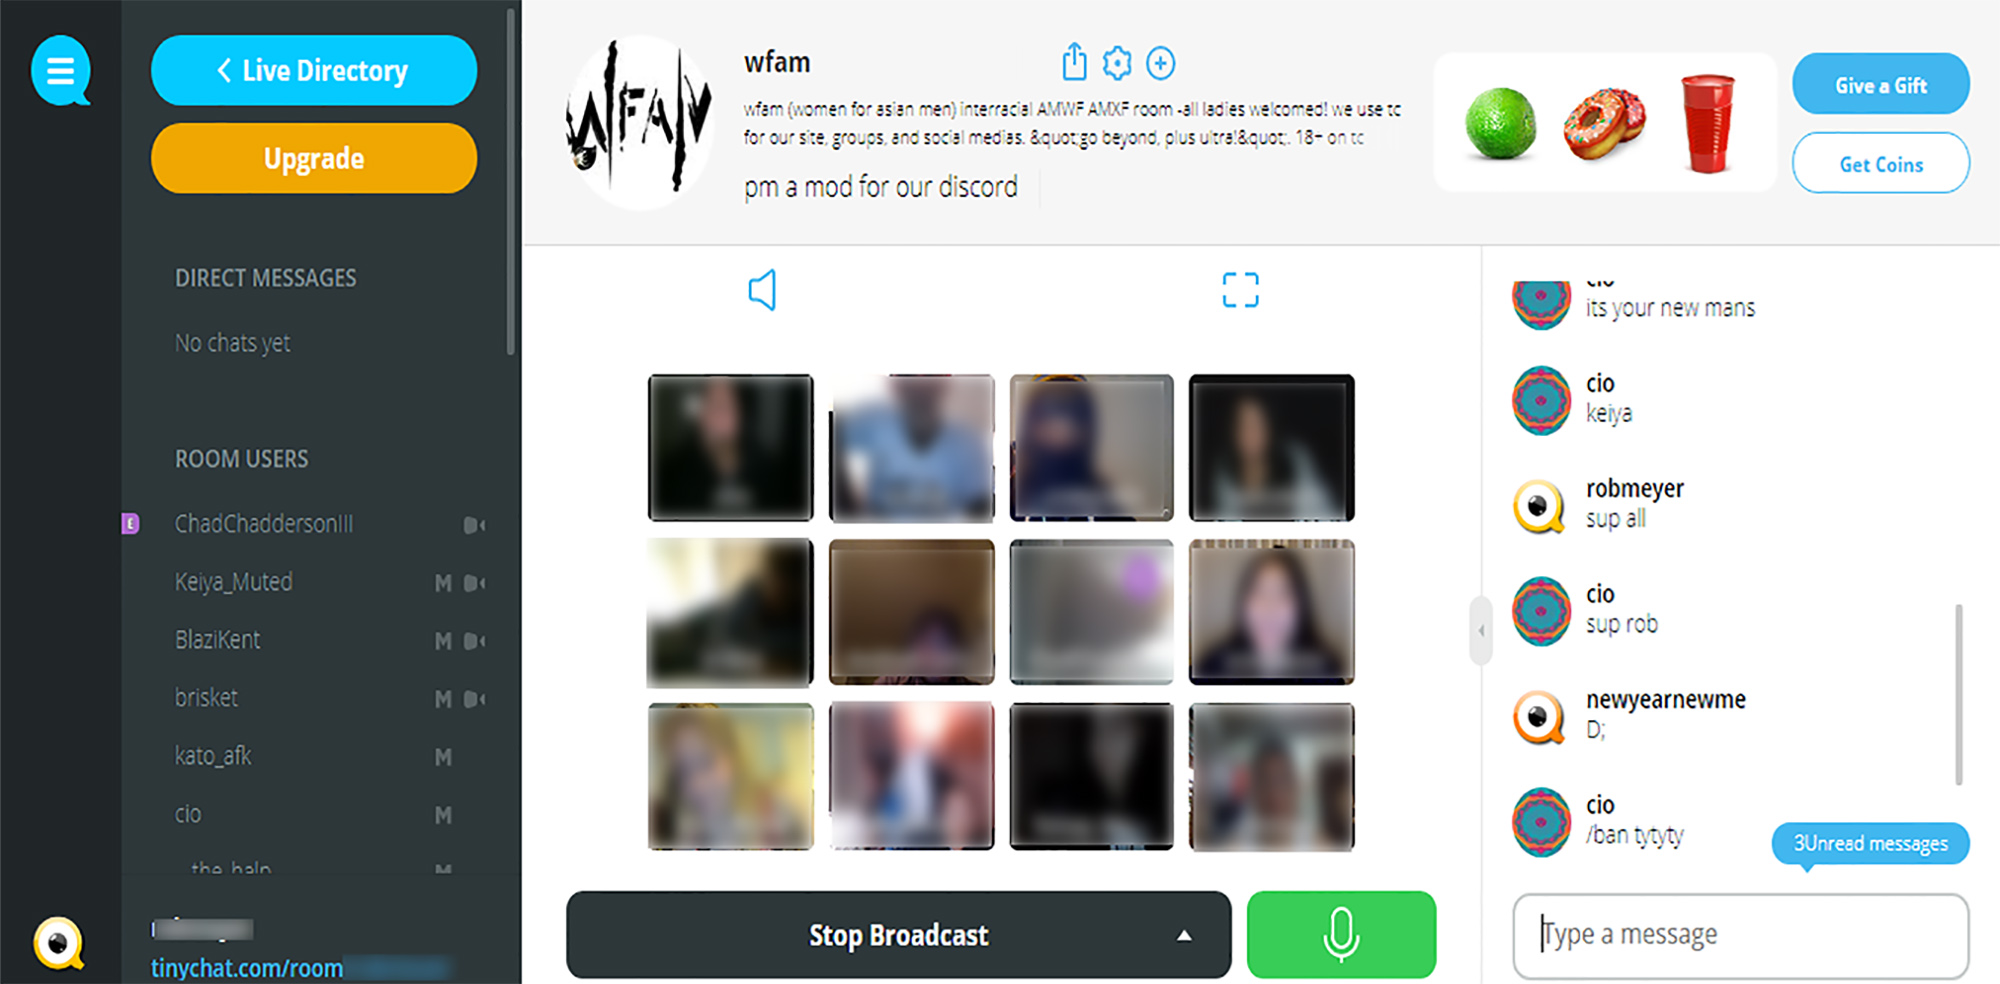 Making Contact on Tinychat.